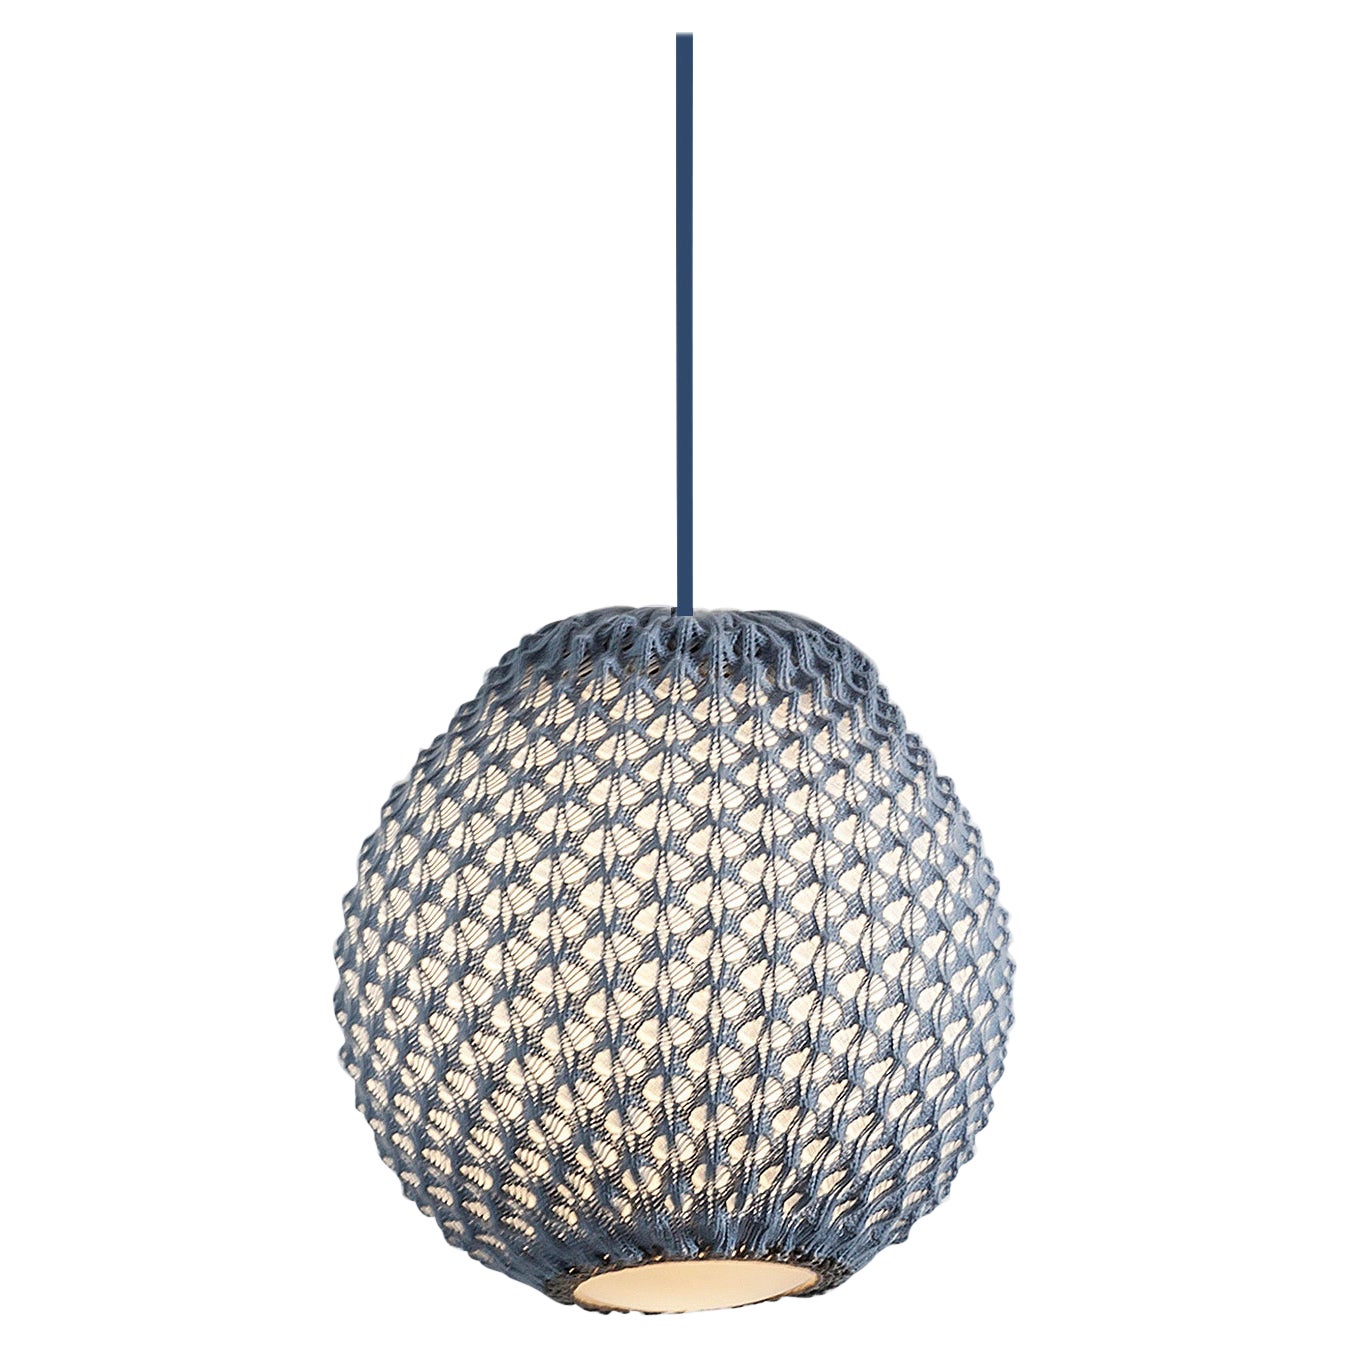 Knitted Lighting Fixture  - Pendant  - Small size 30cm For Sale